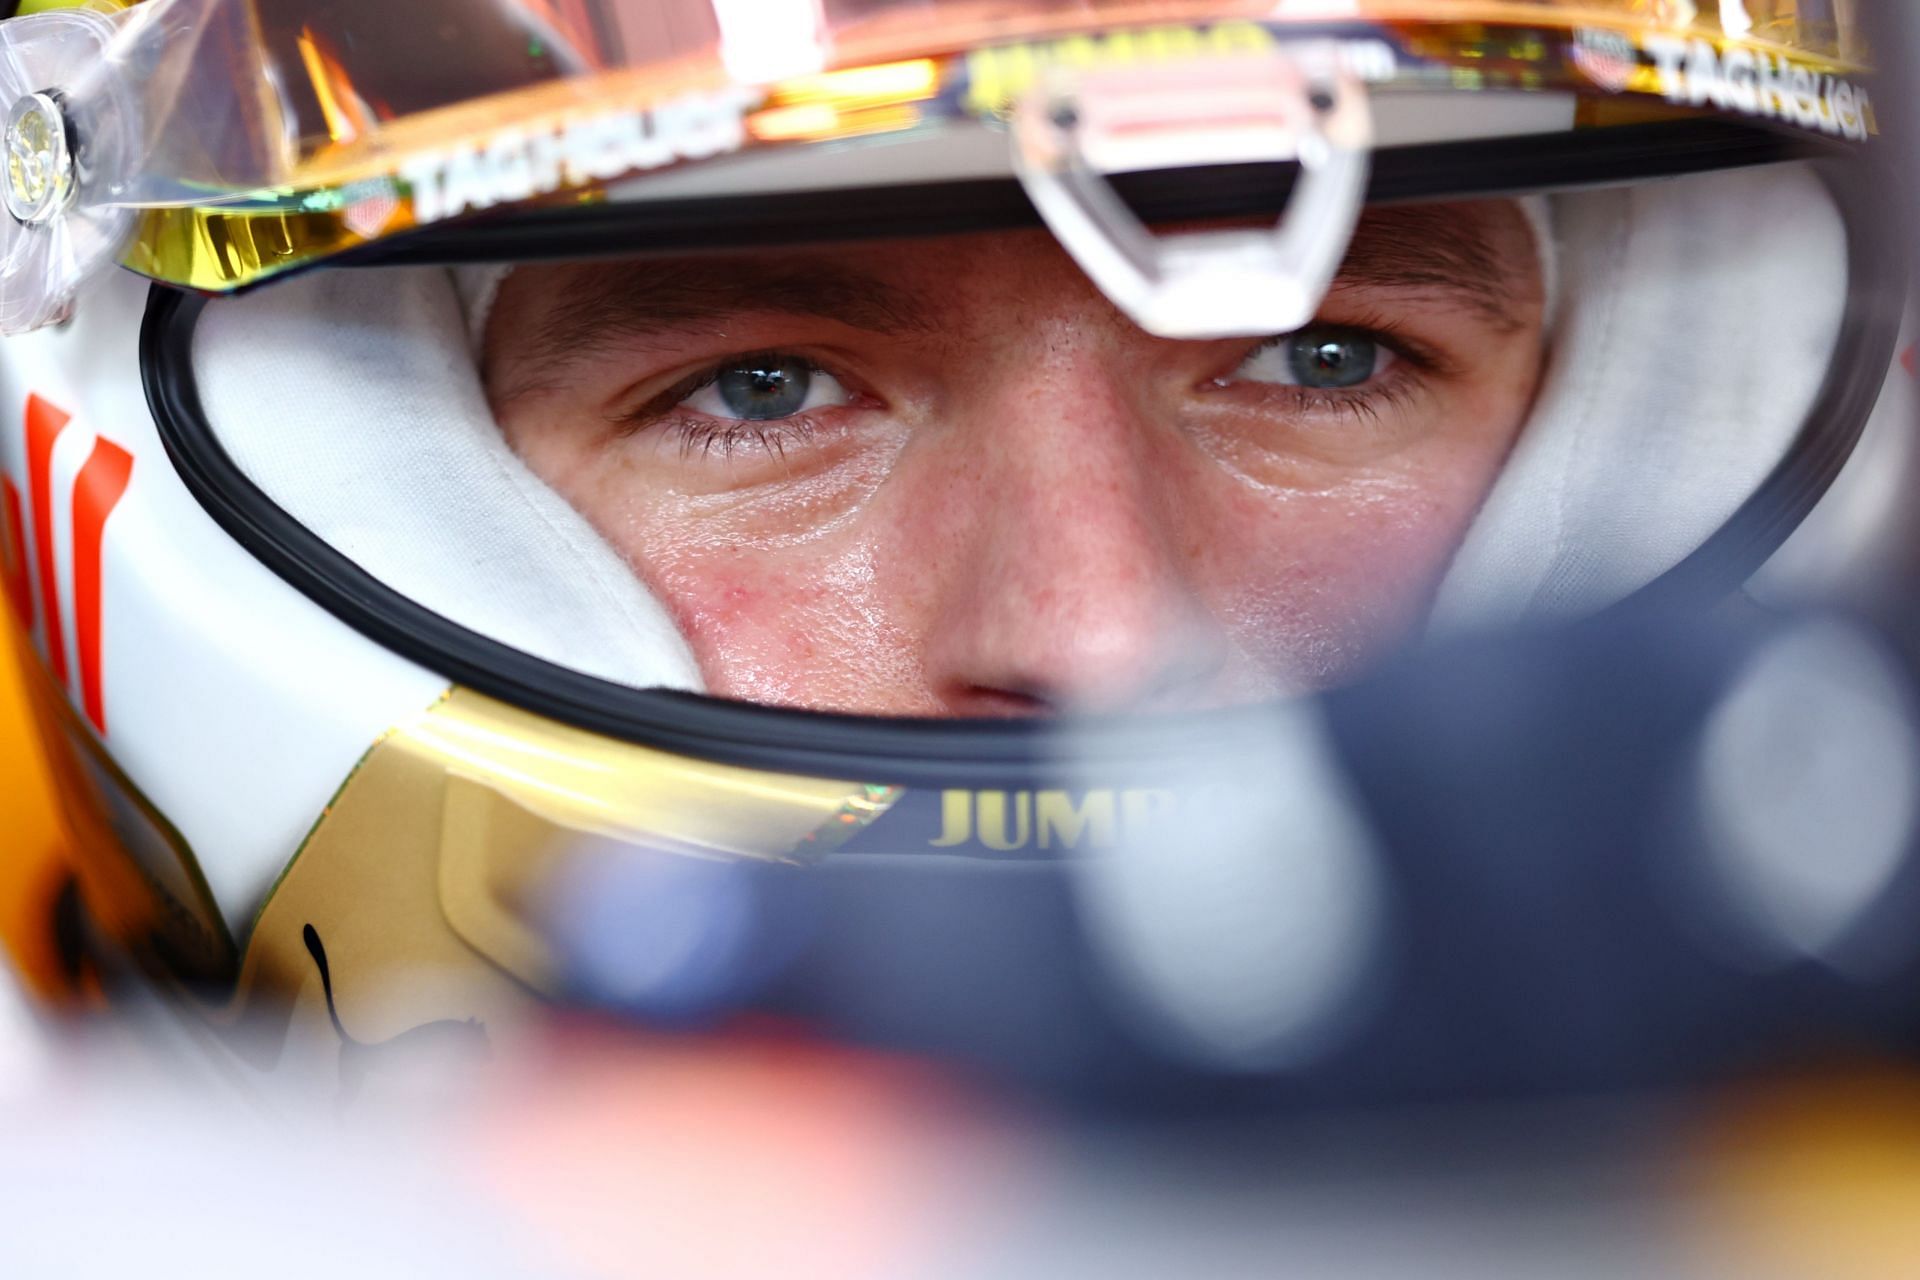 Max Verstappen during qualifying ahead of the F1 Grand Prix of Hungary at Hungaroring on July 30, 2022 in Budapest, Hungary. (Photo by Mark Thompson/Getty Images)